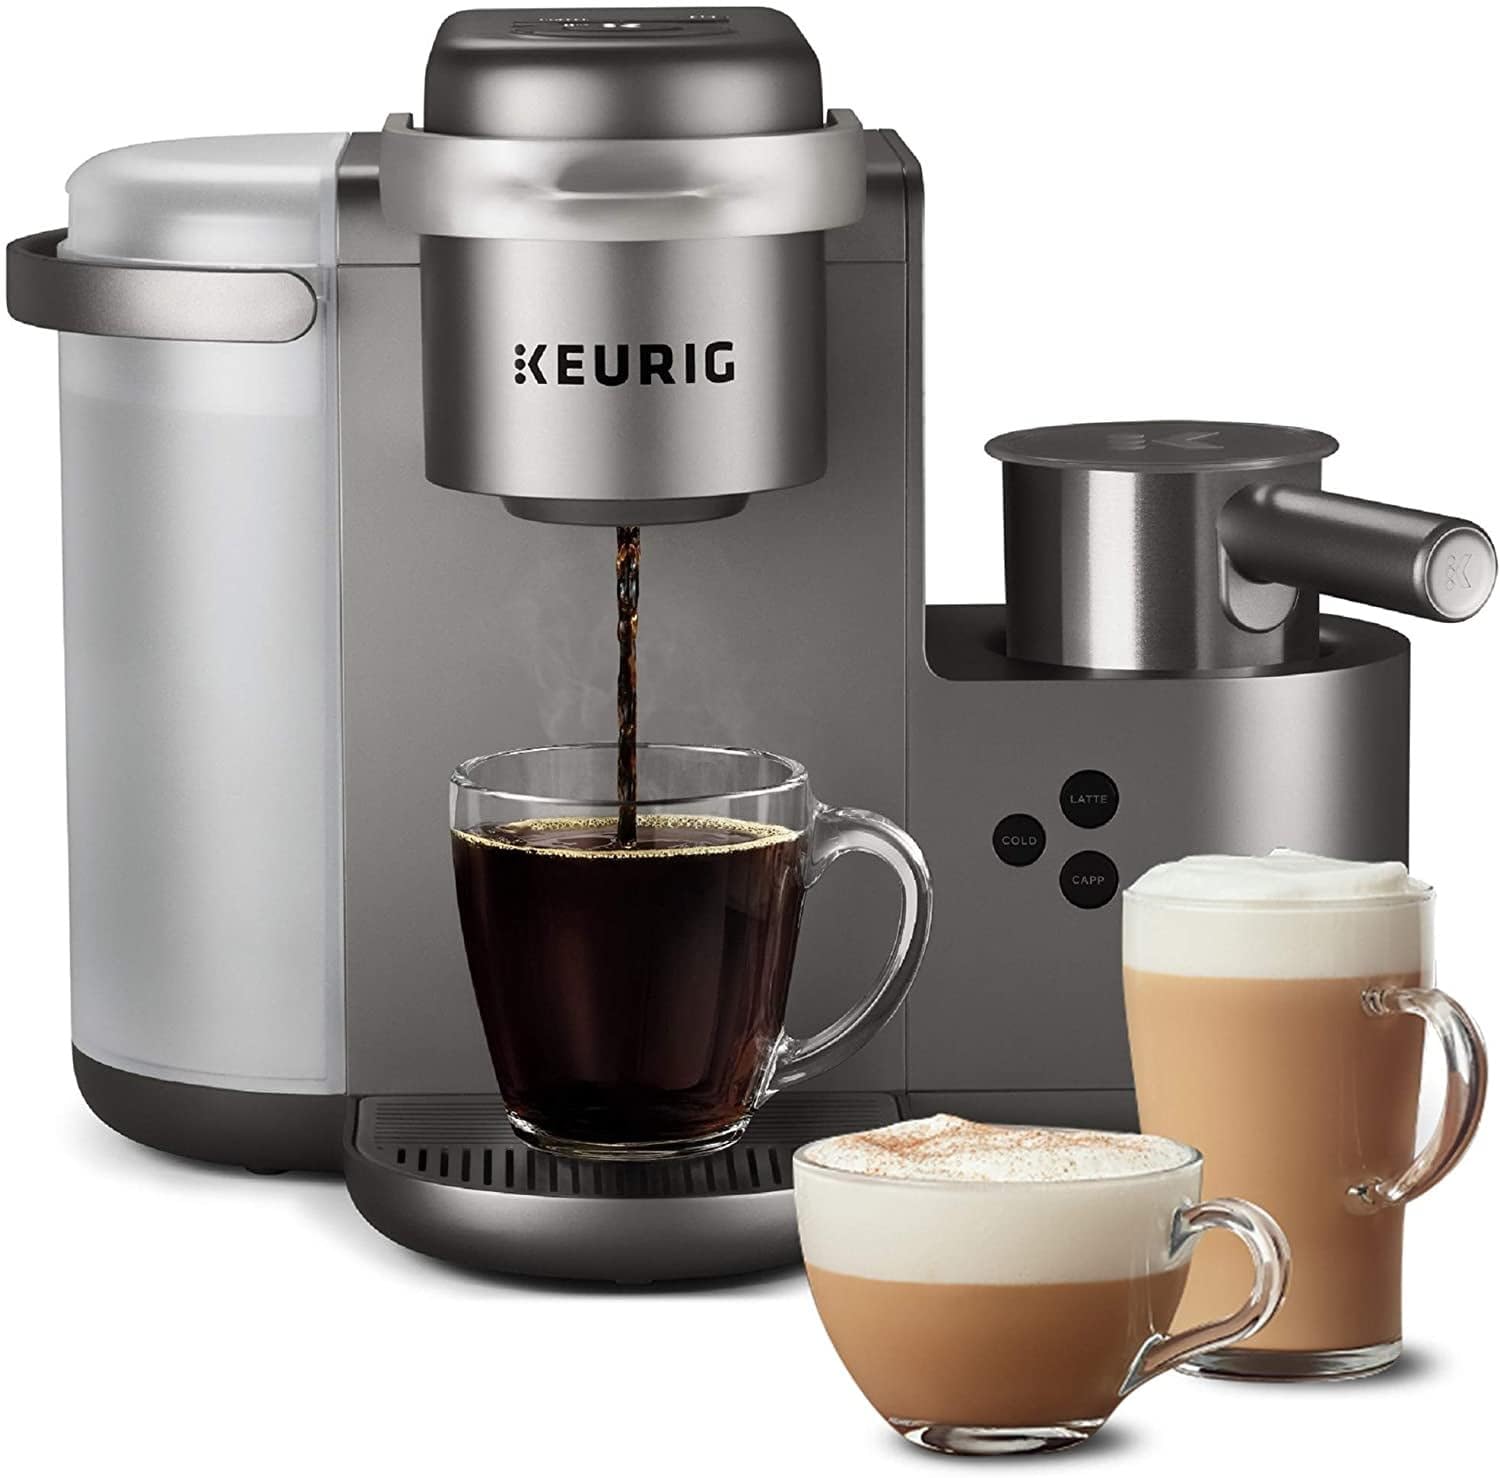 Keurig K-Cafe Special Edition Coffee Maker with Latte and Cappuccino Functionality (Nickel) Bundle with Donut Shop and Italian Medium Roast Coffee Pods and Stainless Steel Tumbler (4 Items)